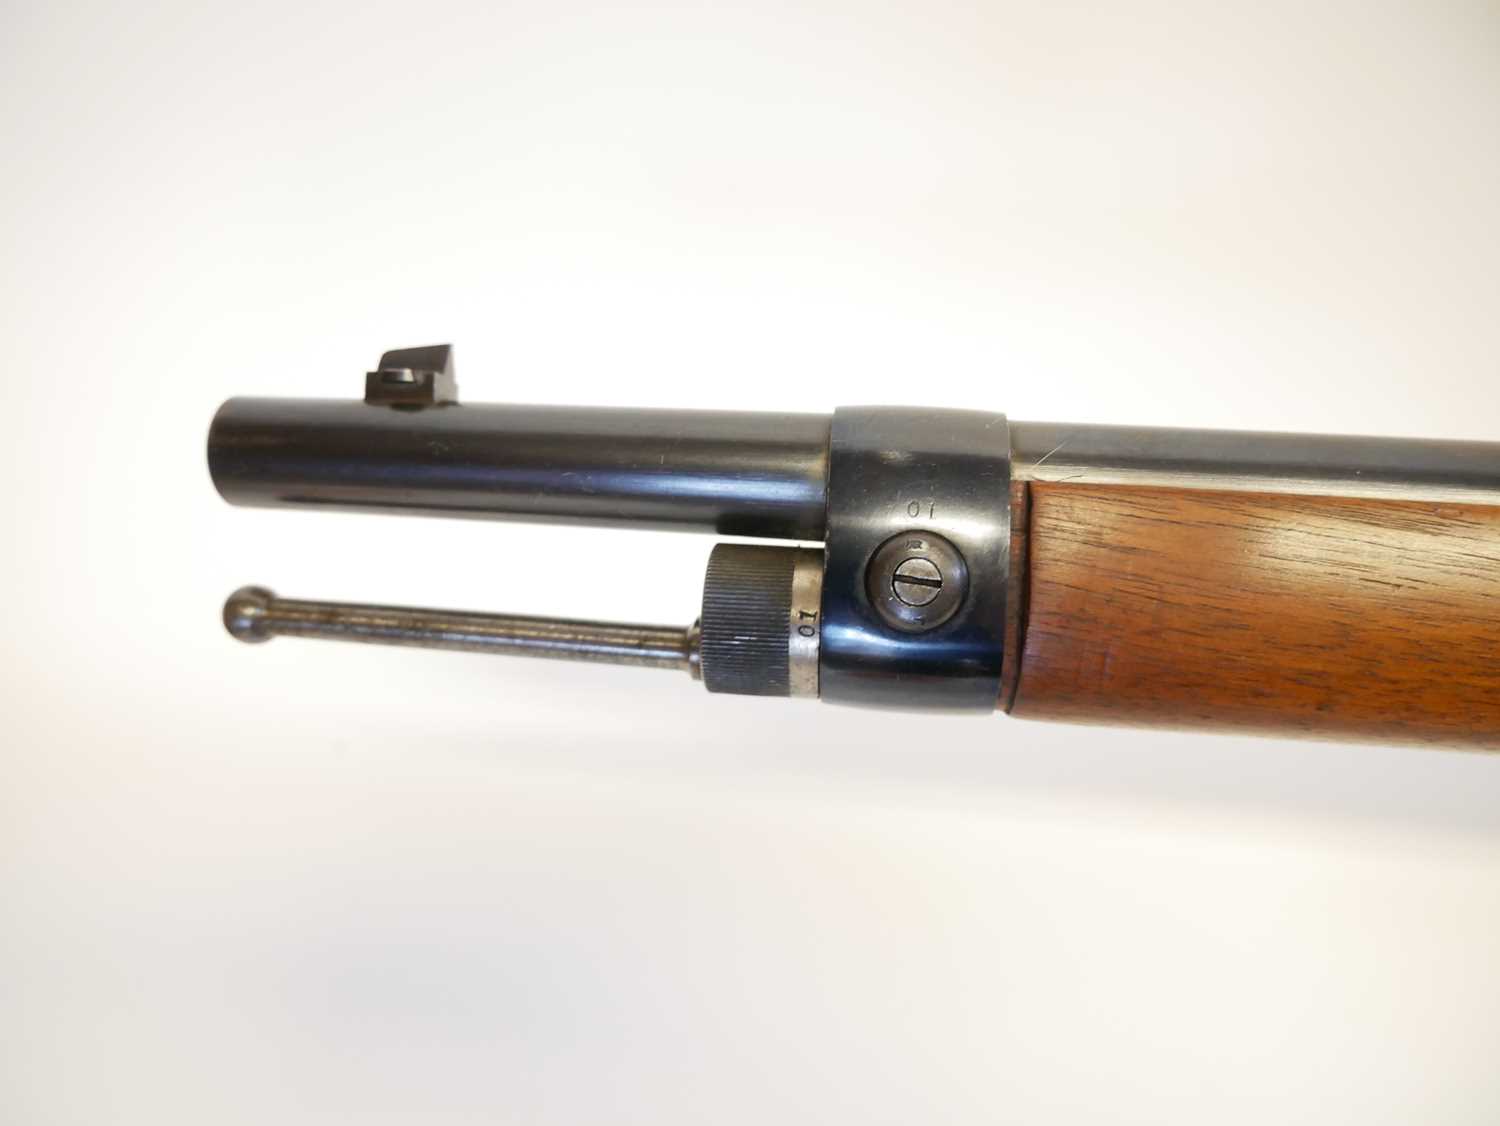 Mauser M1871/84 bolt action rifle 11 x 60R / .43 calibre, matching serial numbers 6701, 30.5" barrel - Image 20 of 20